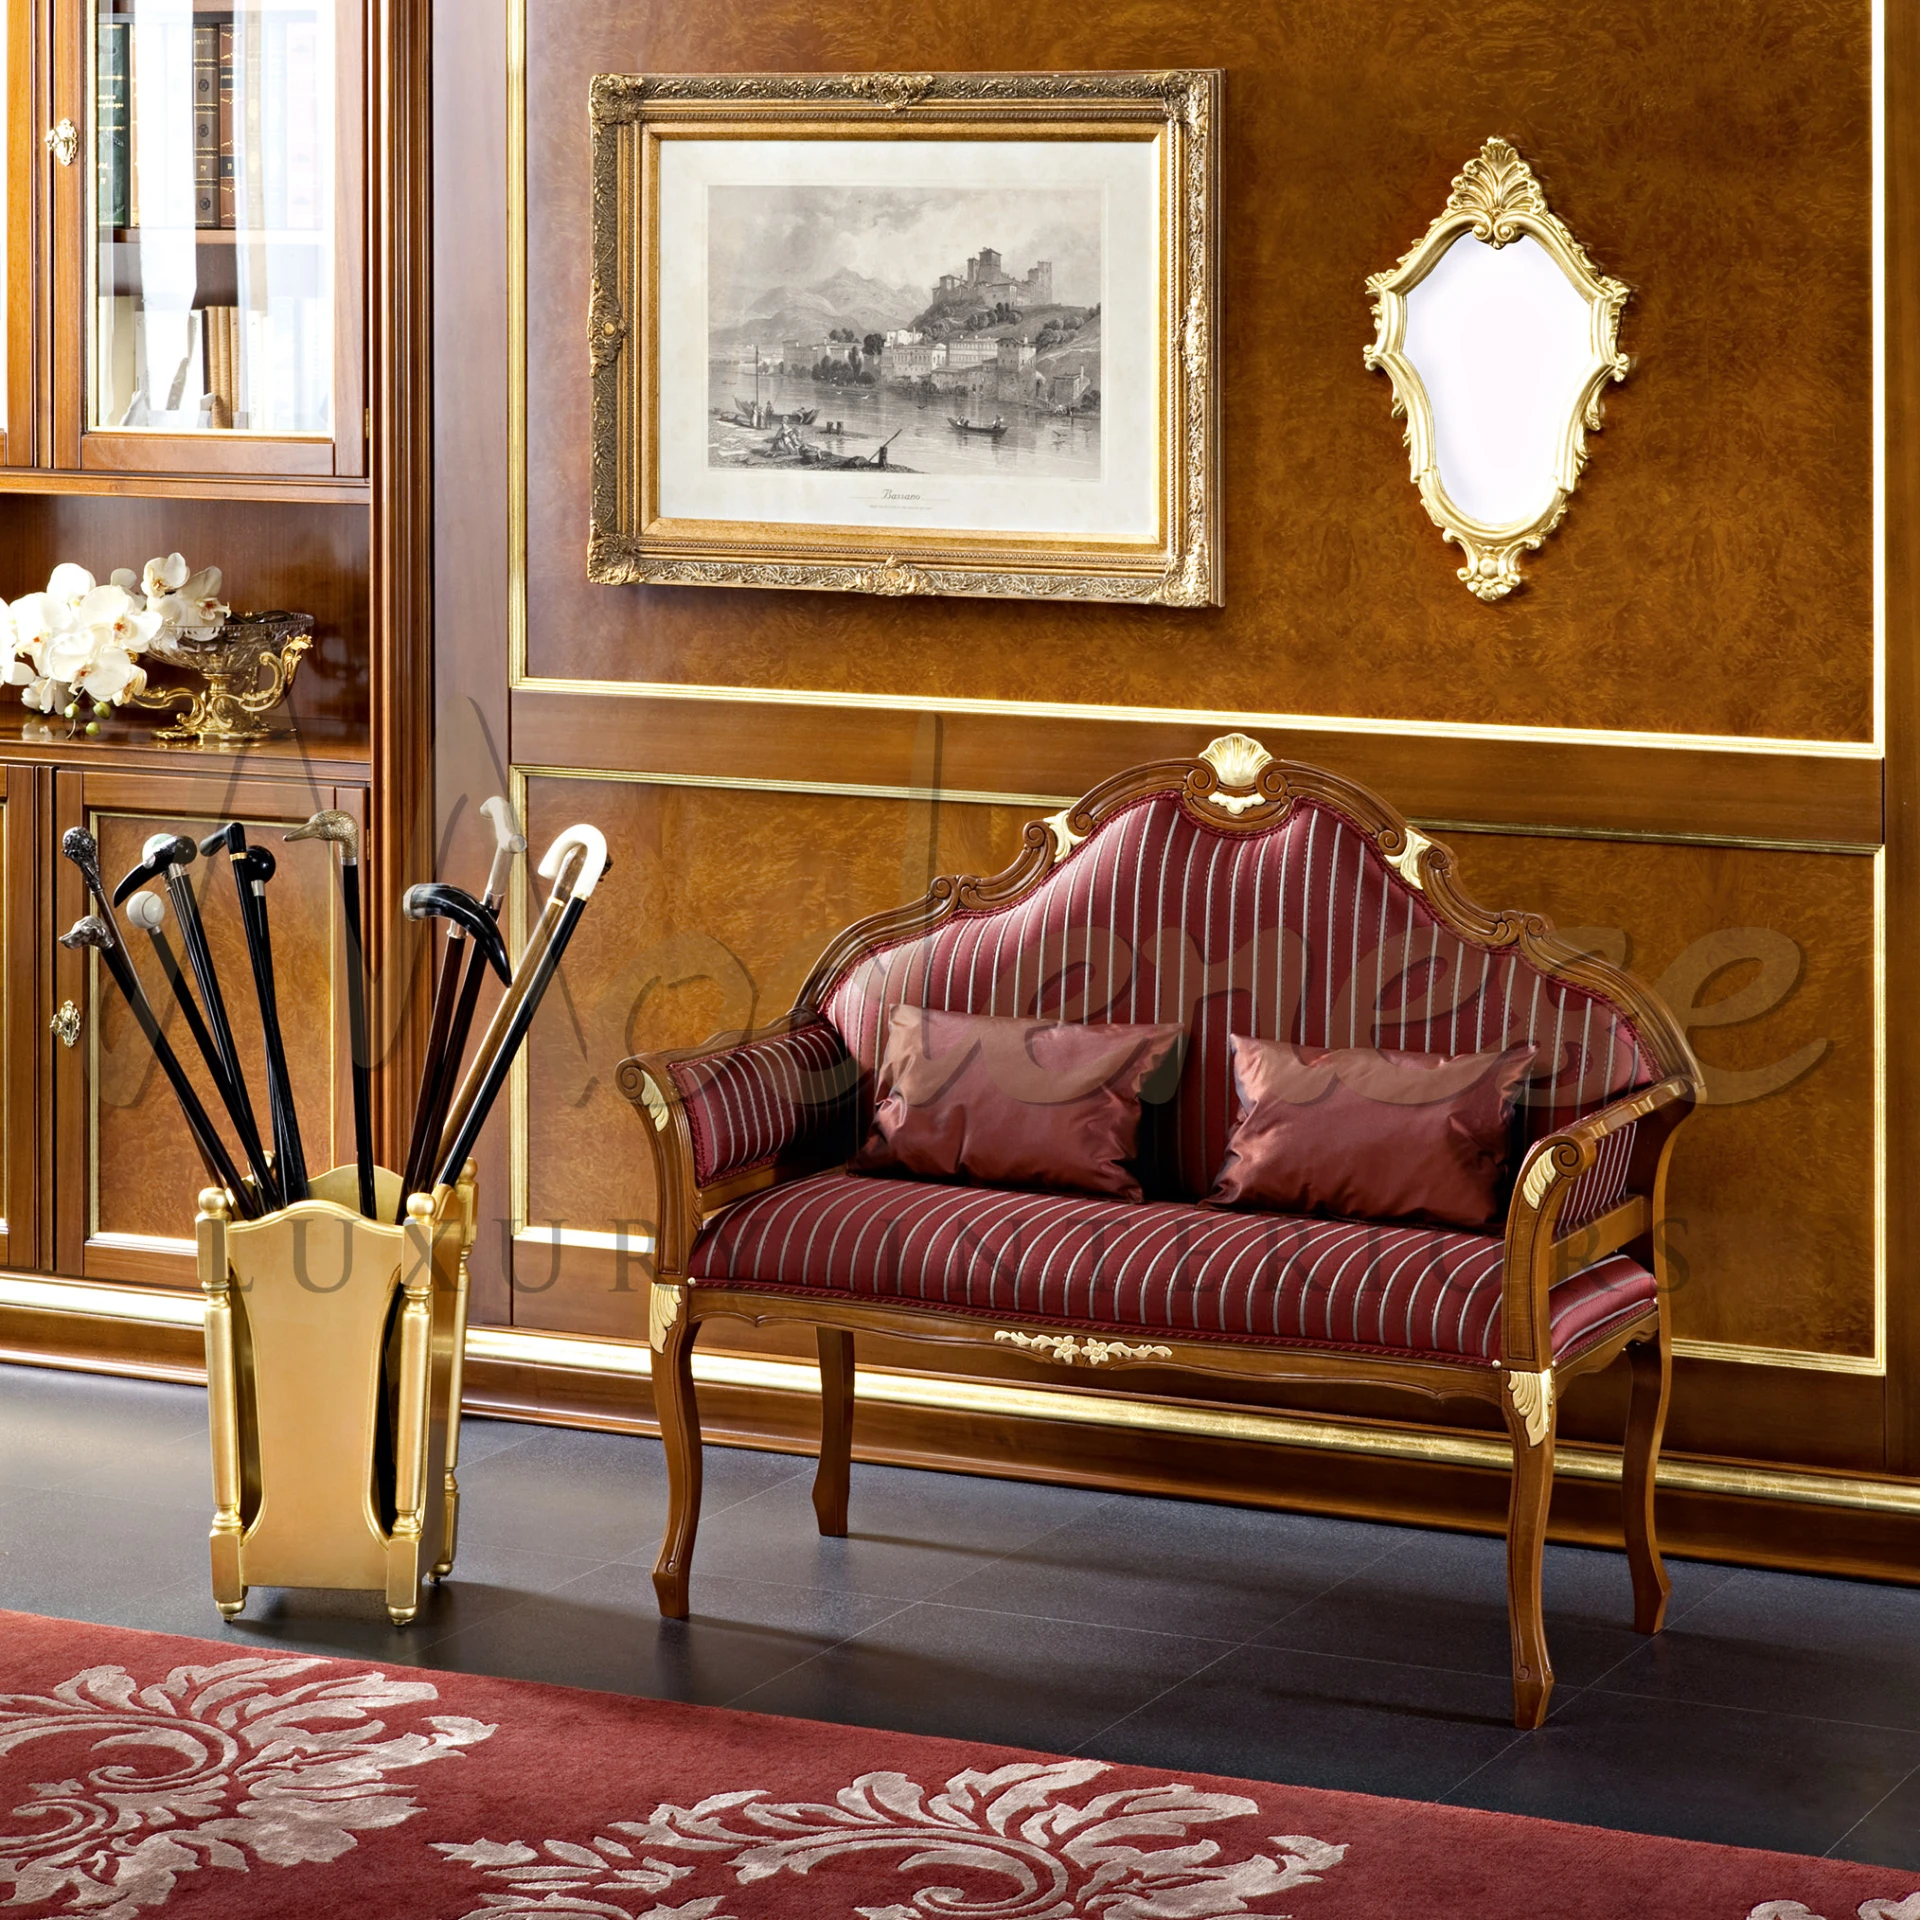 Revitalize your home décor with our exquisite sofa, designed to complement any interior style.